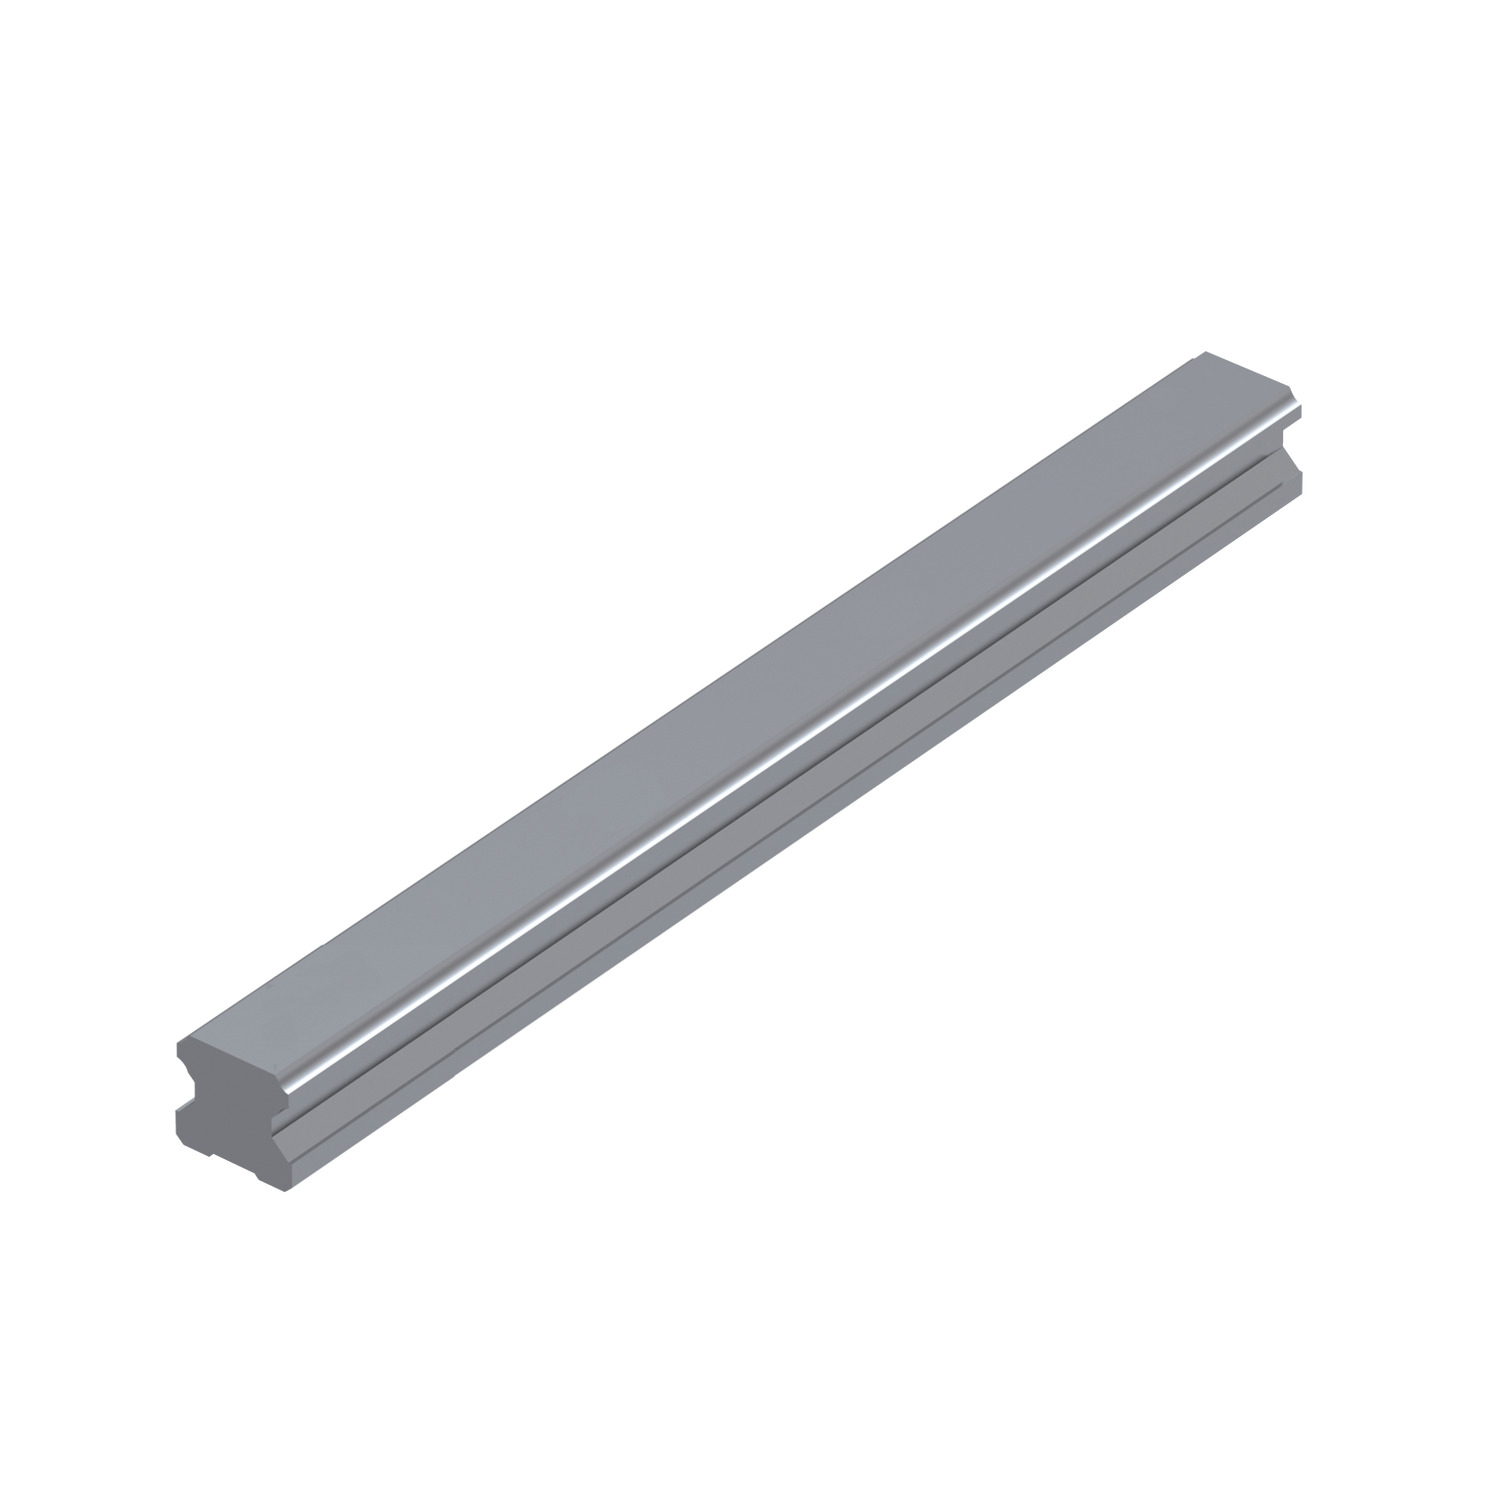 L1016.RF35-0200 Linear guide rail rear fixing 35mm 0200 Hardened and ground steel. EC:20168469 WG:05063055297110